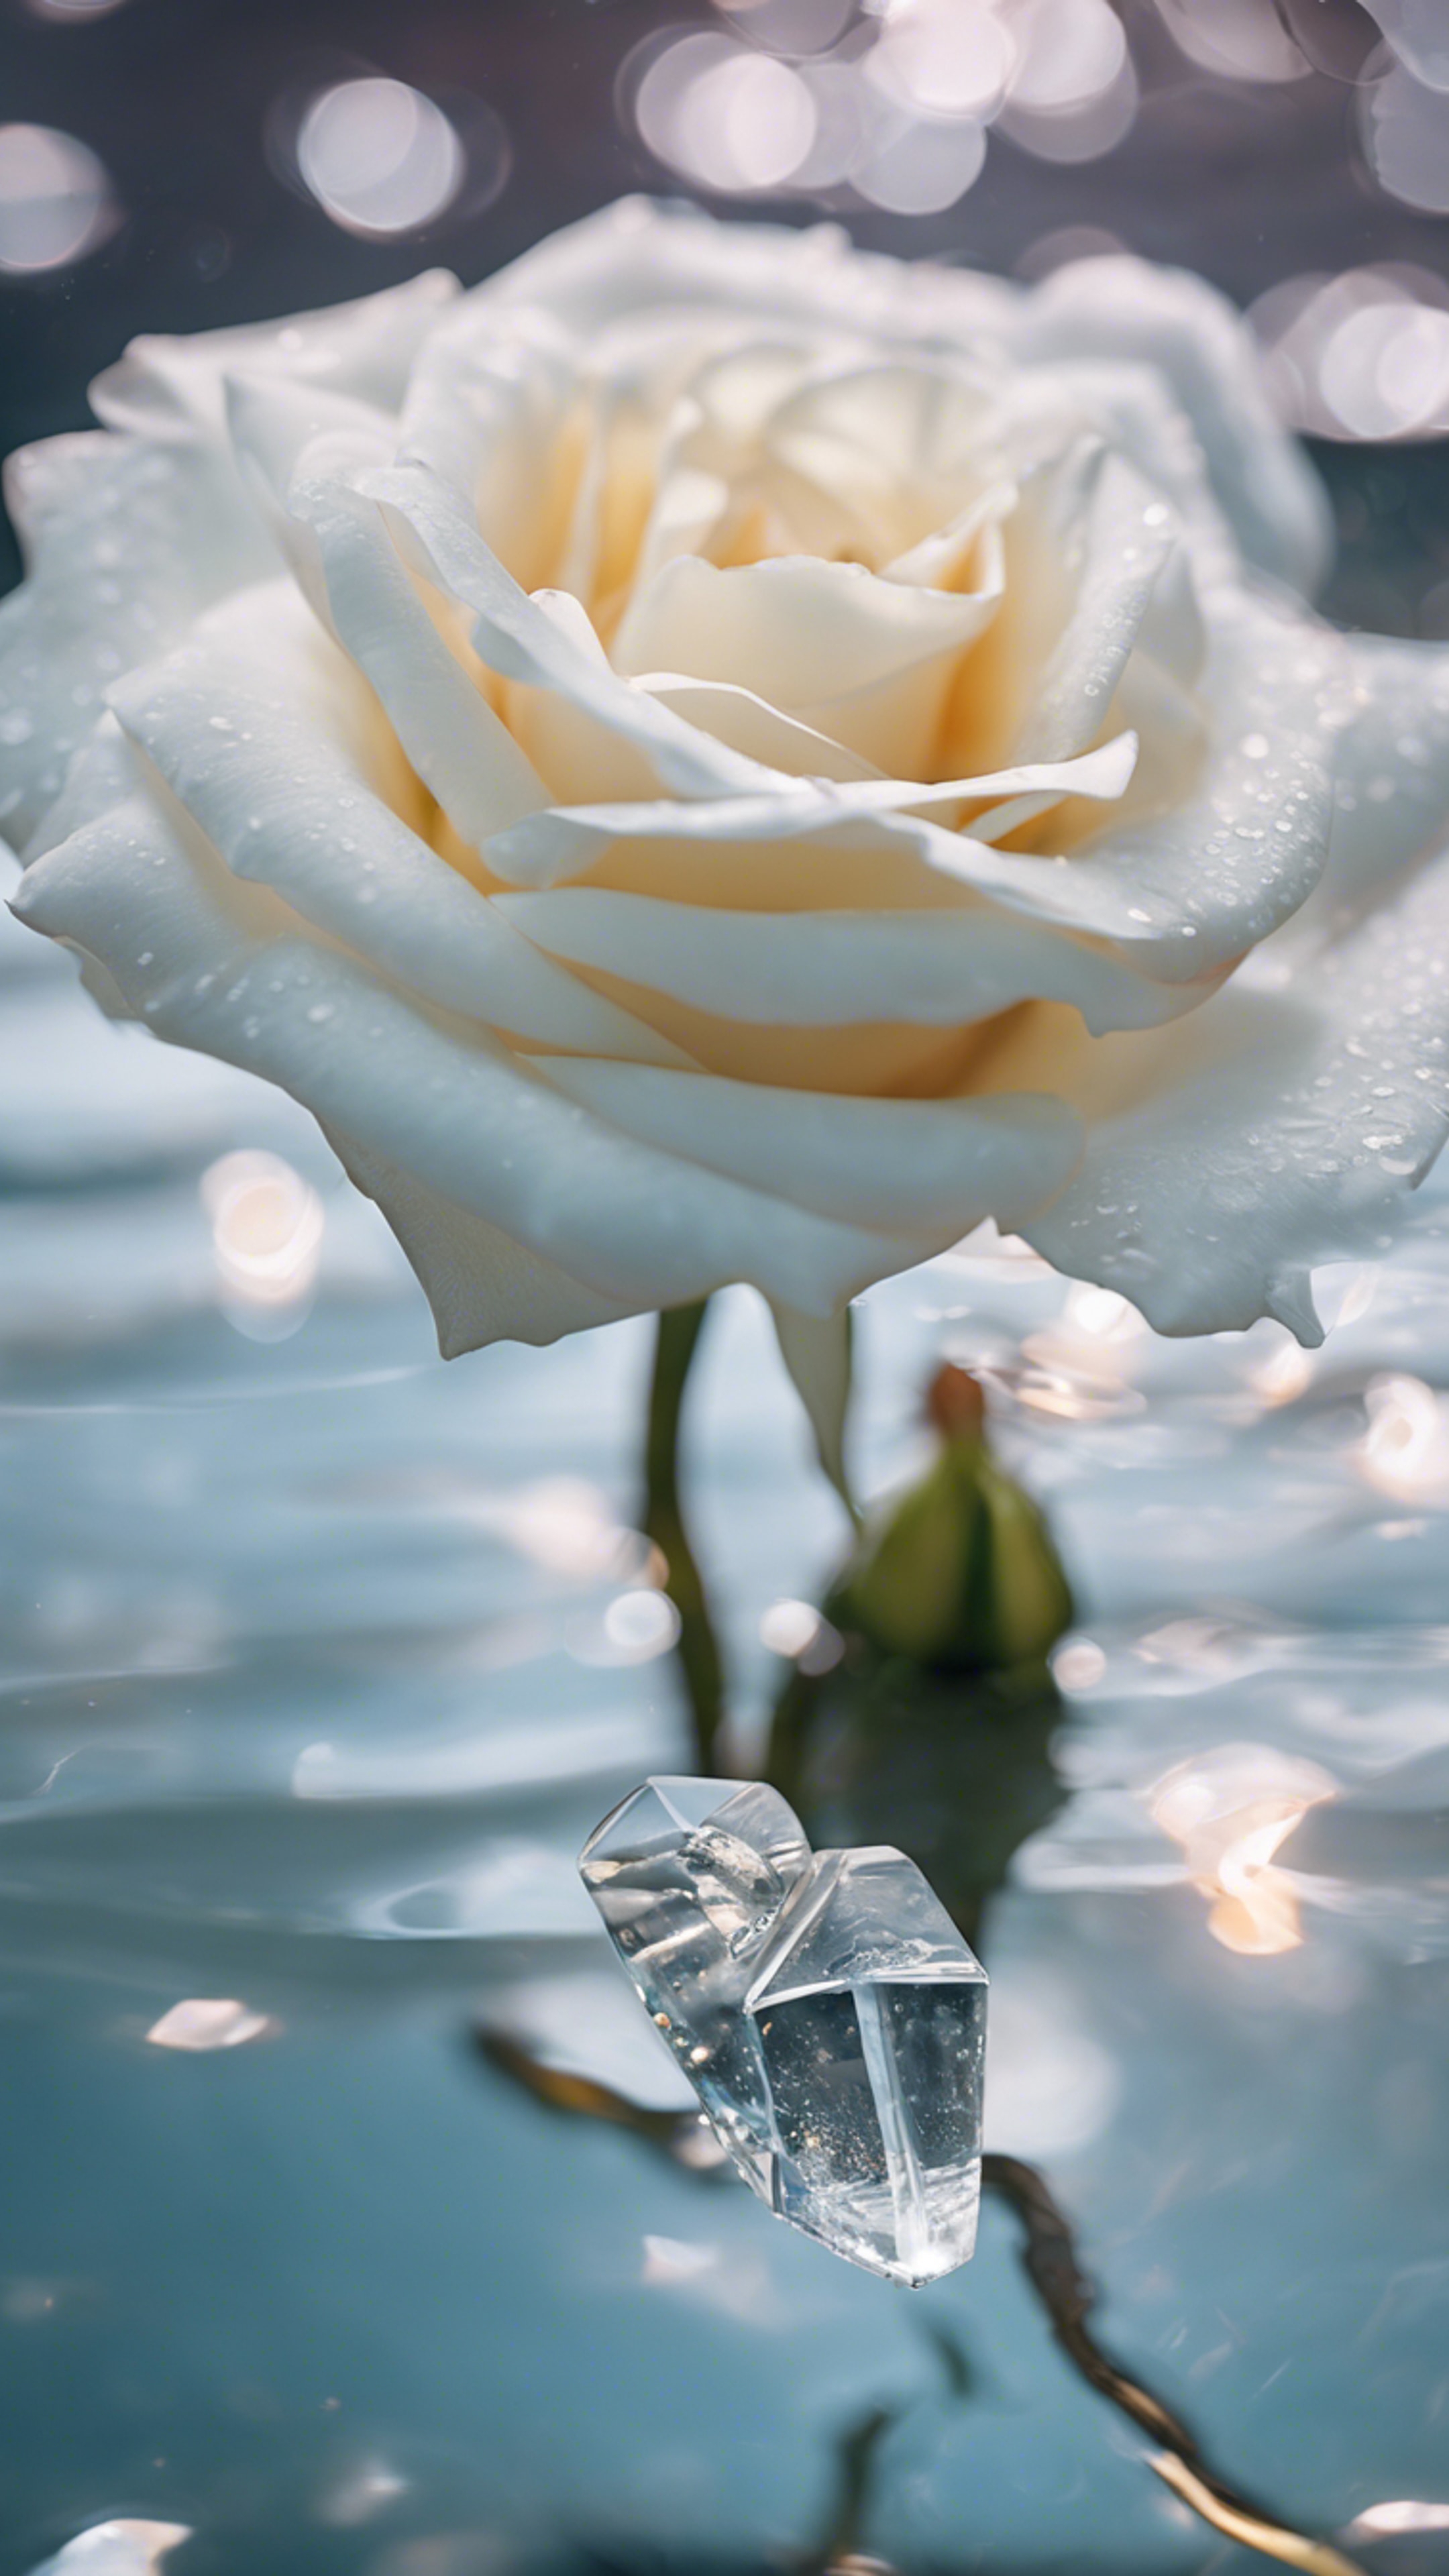 A white rose submerged in clear crystal water, petals gracefully spreading. Wallpaper[af81d3e8e21443b29805]